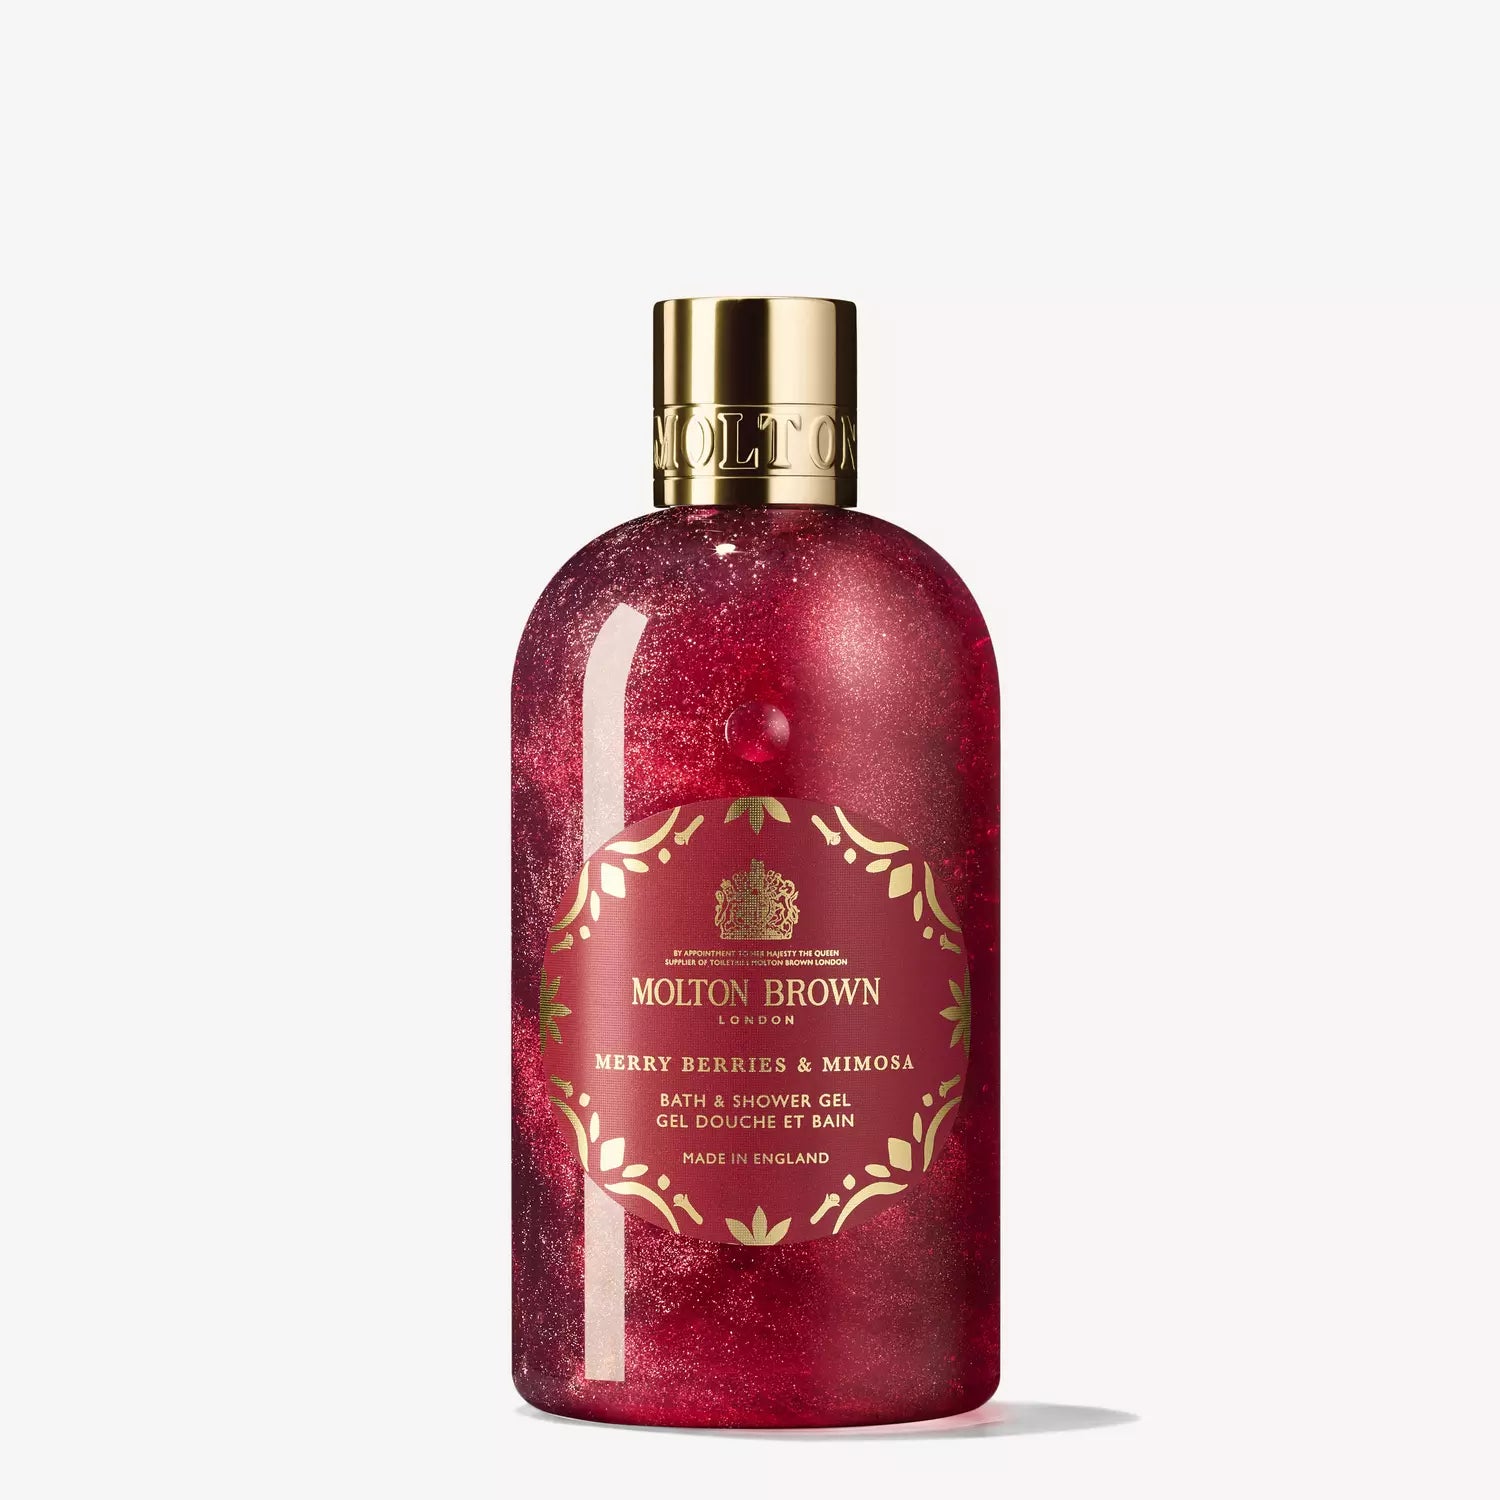 Molton Brown Merry Berries and Mimosa Bath & Shower Gel